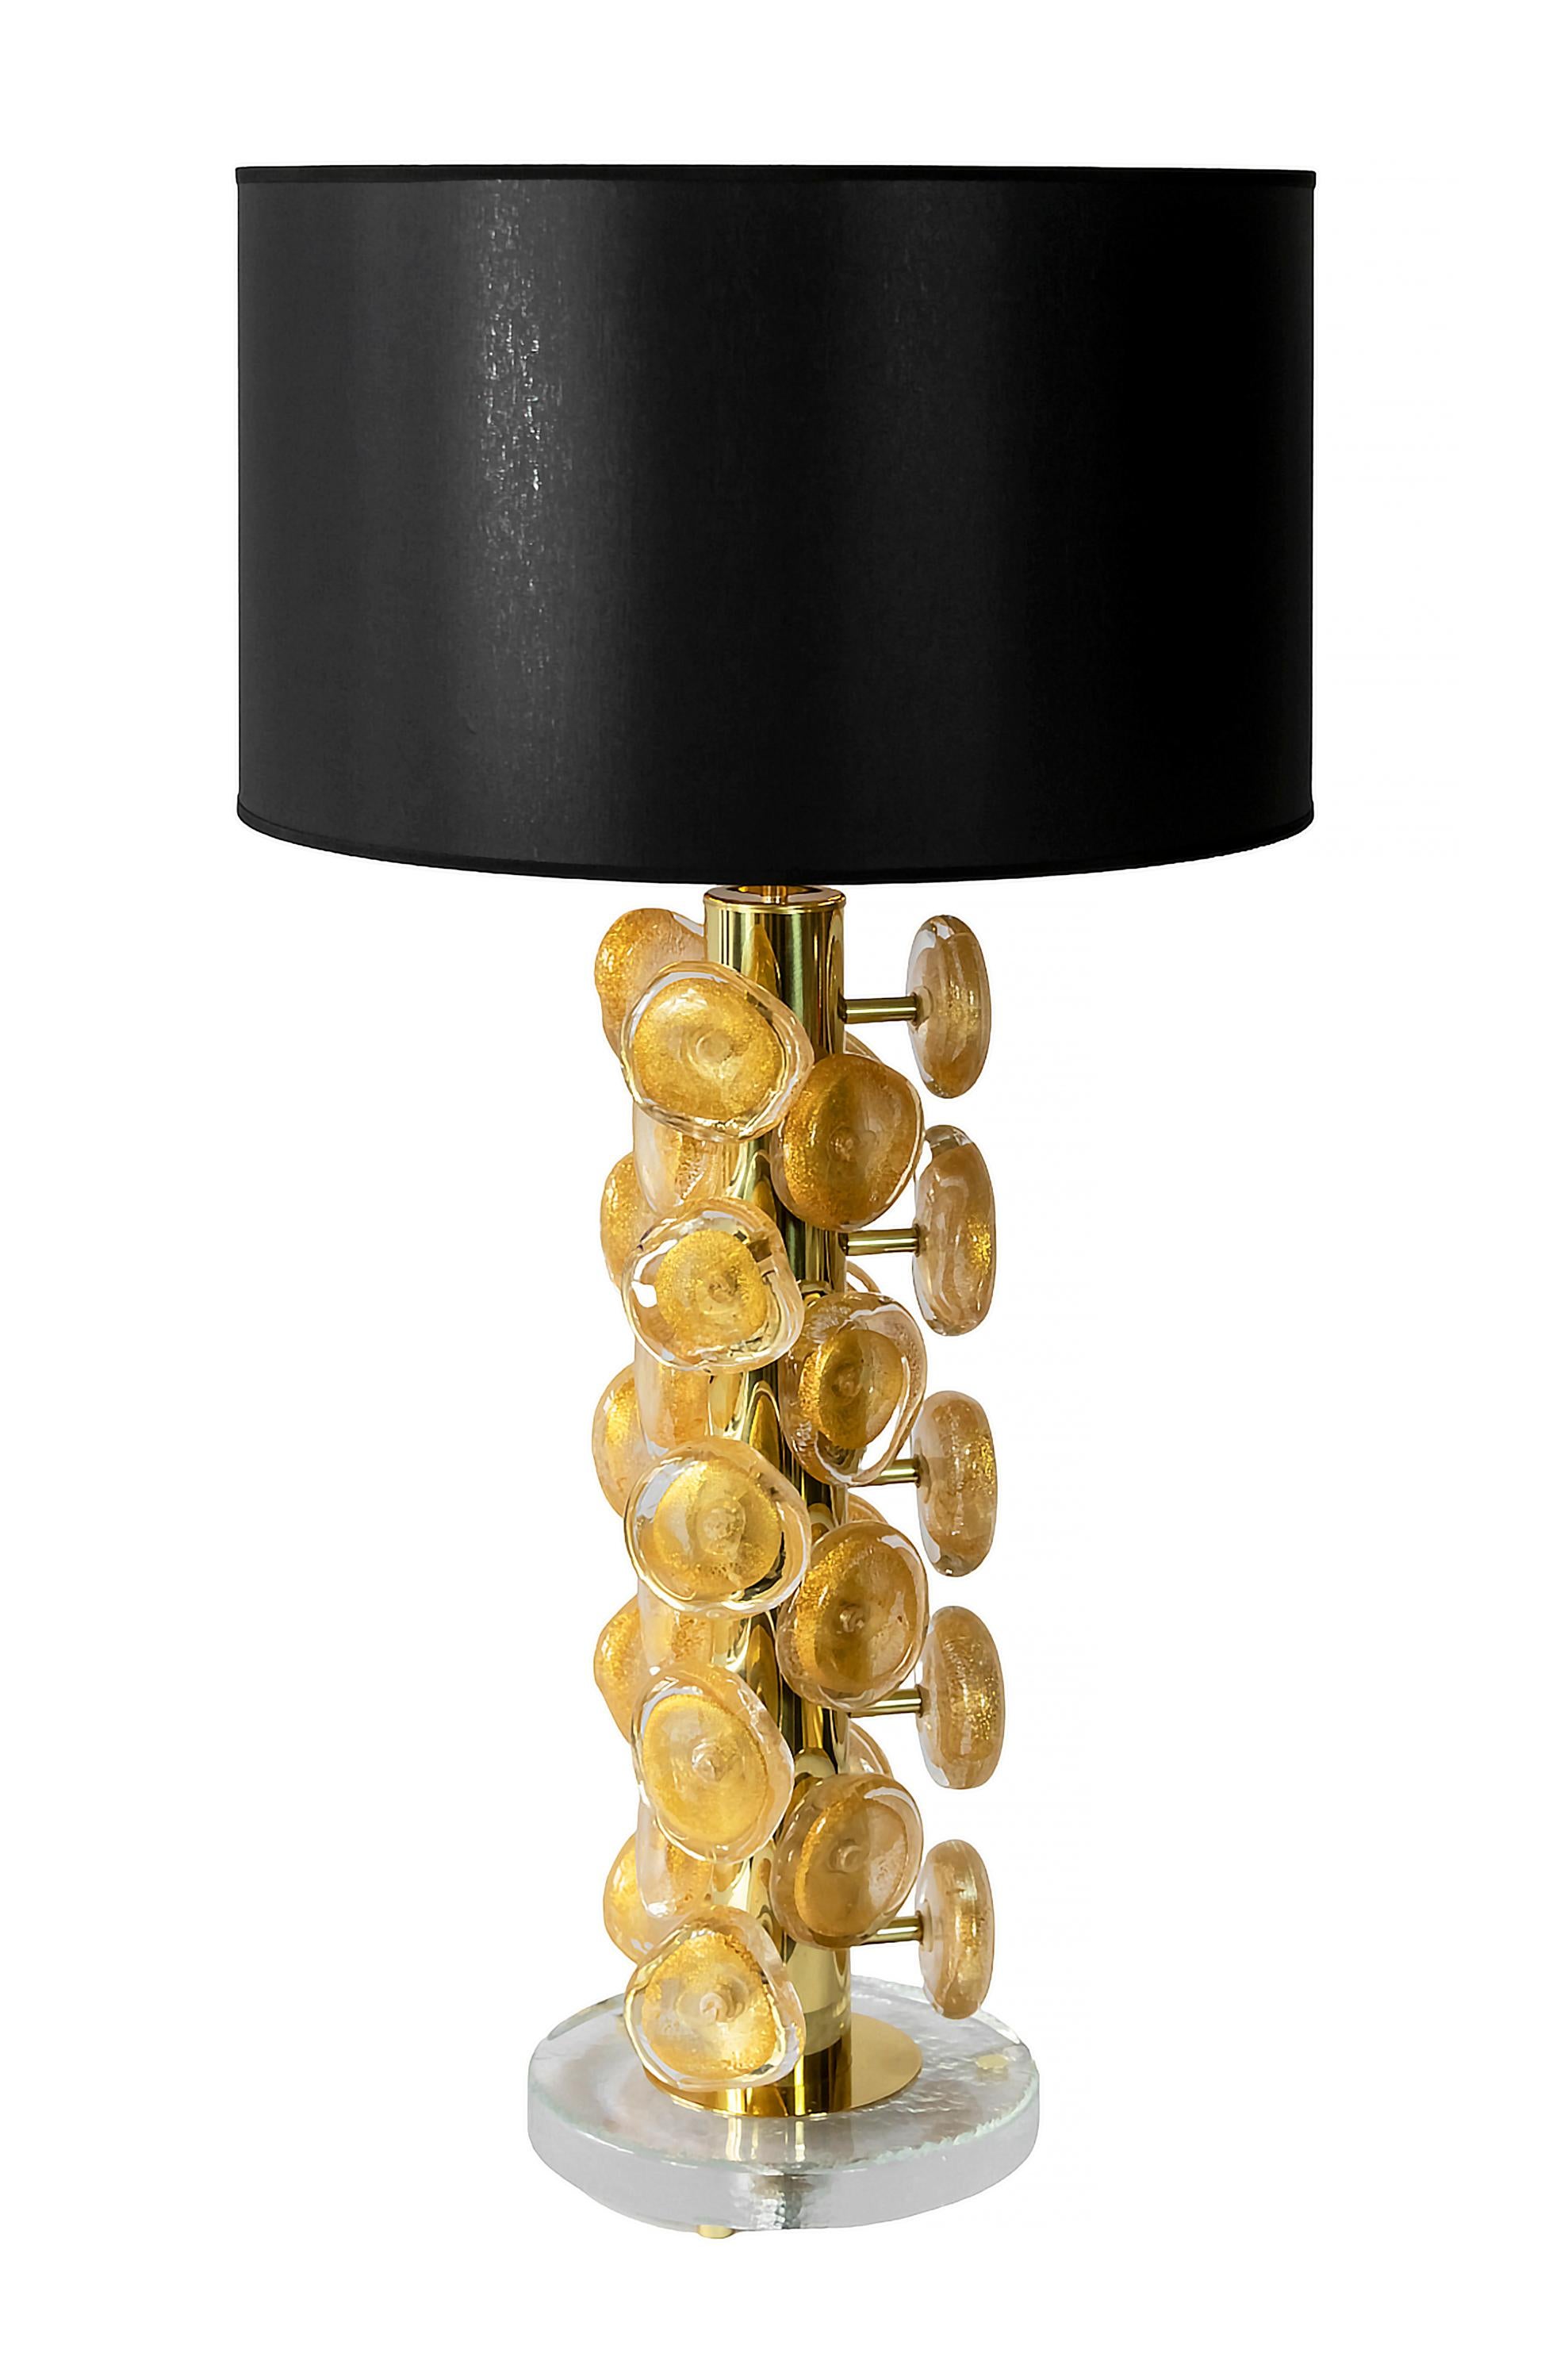 Pair of Italian table lamps made in brass and thick glass base with brass legs.
Decorated with clear and gold dust inside Murano glass details. Each glass detail is handmade in asymmetric form of approx. 9.5 cm diameter.
Both lamps are with new